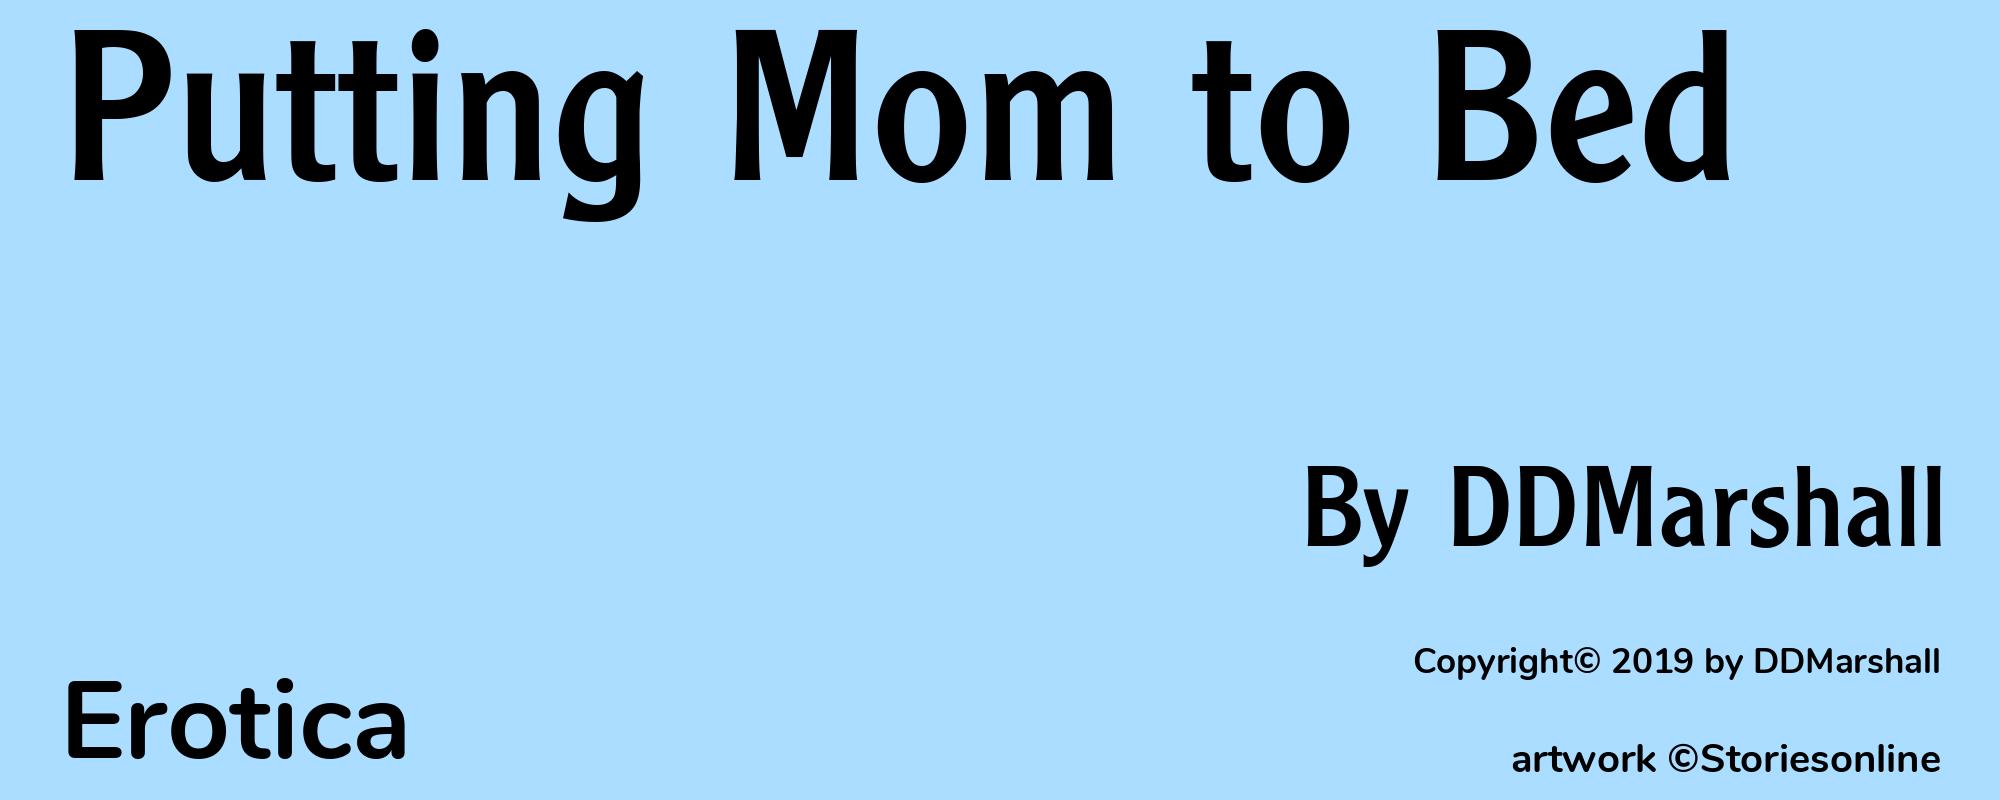 Putting Mom to Bed - Cover